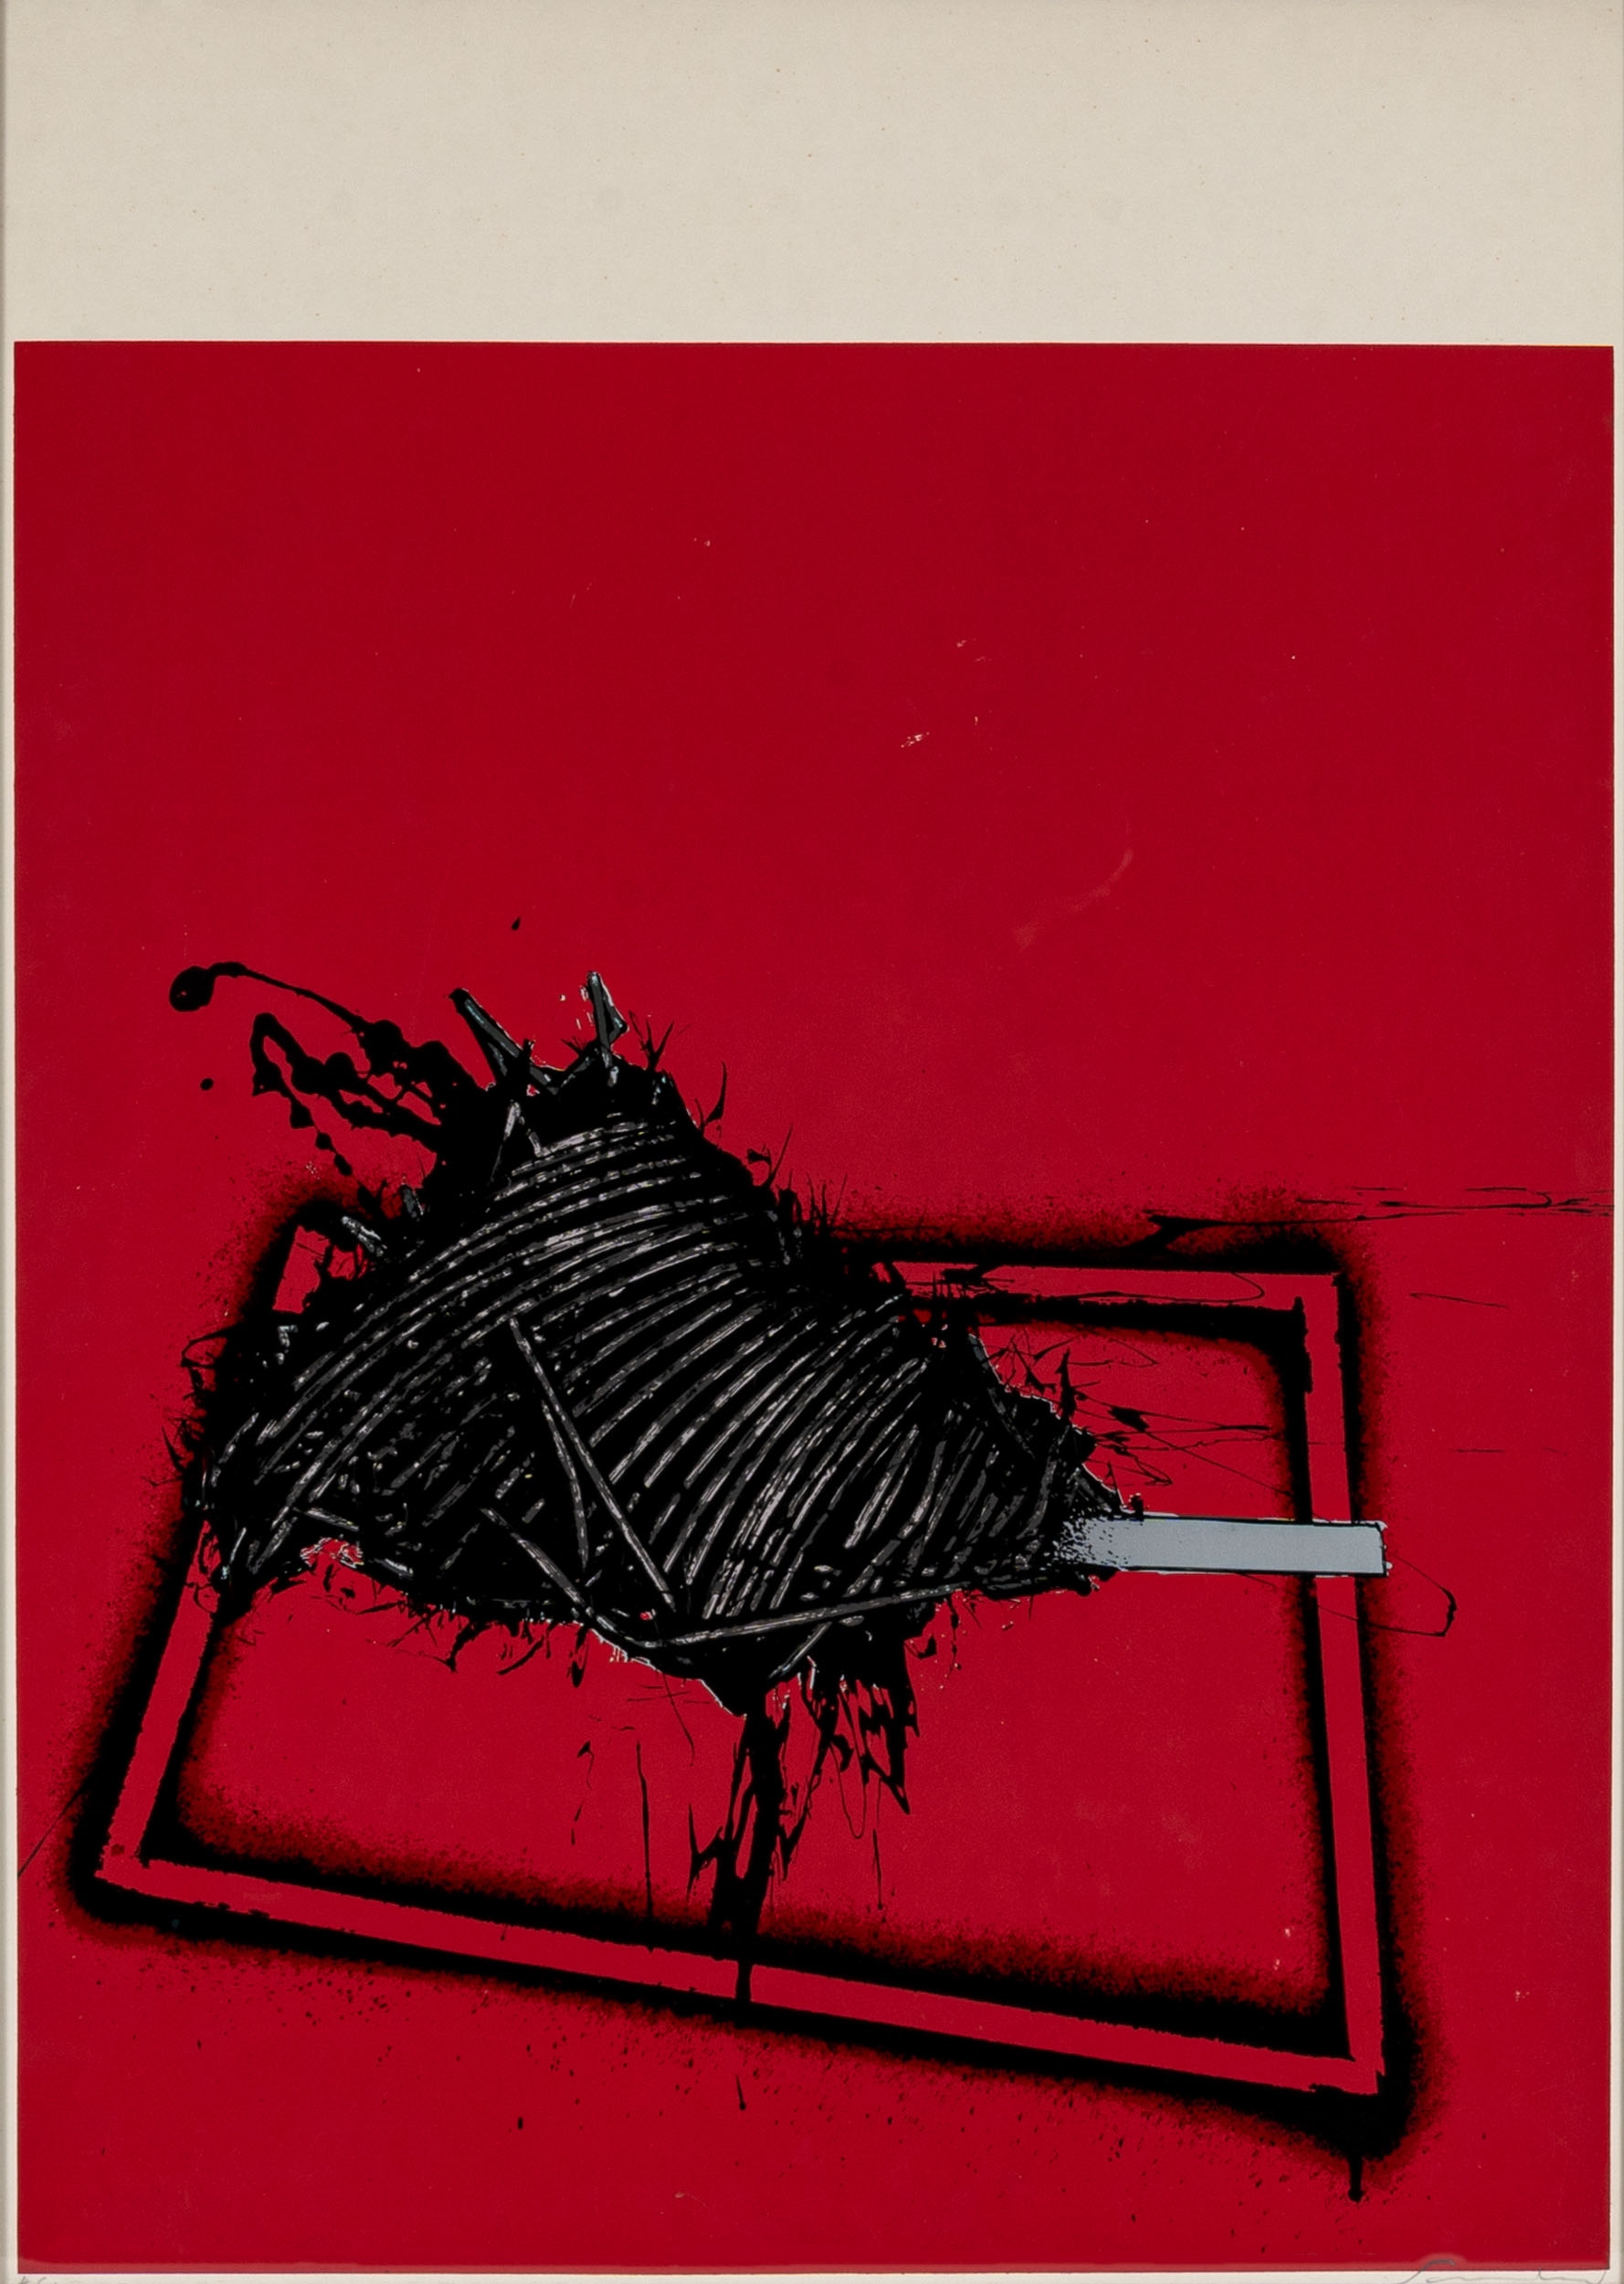 Artwork by Emilio Scanavino, Untitled, Made of Lithograph